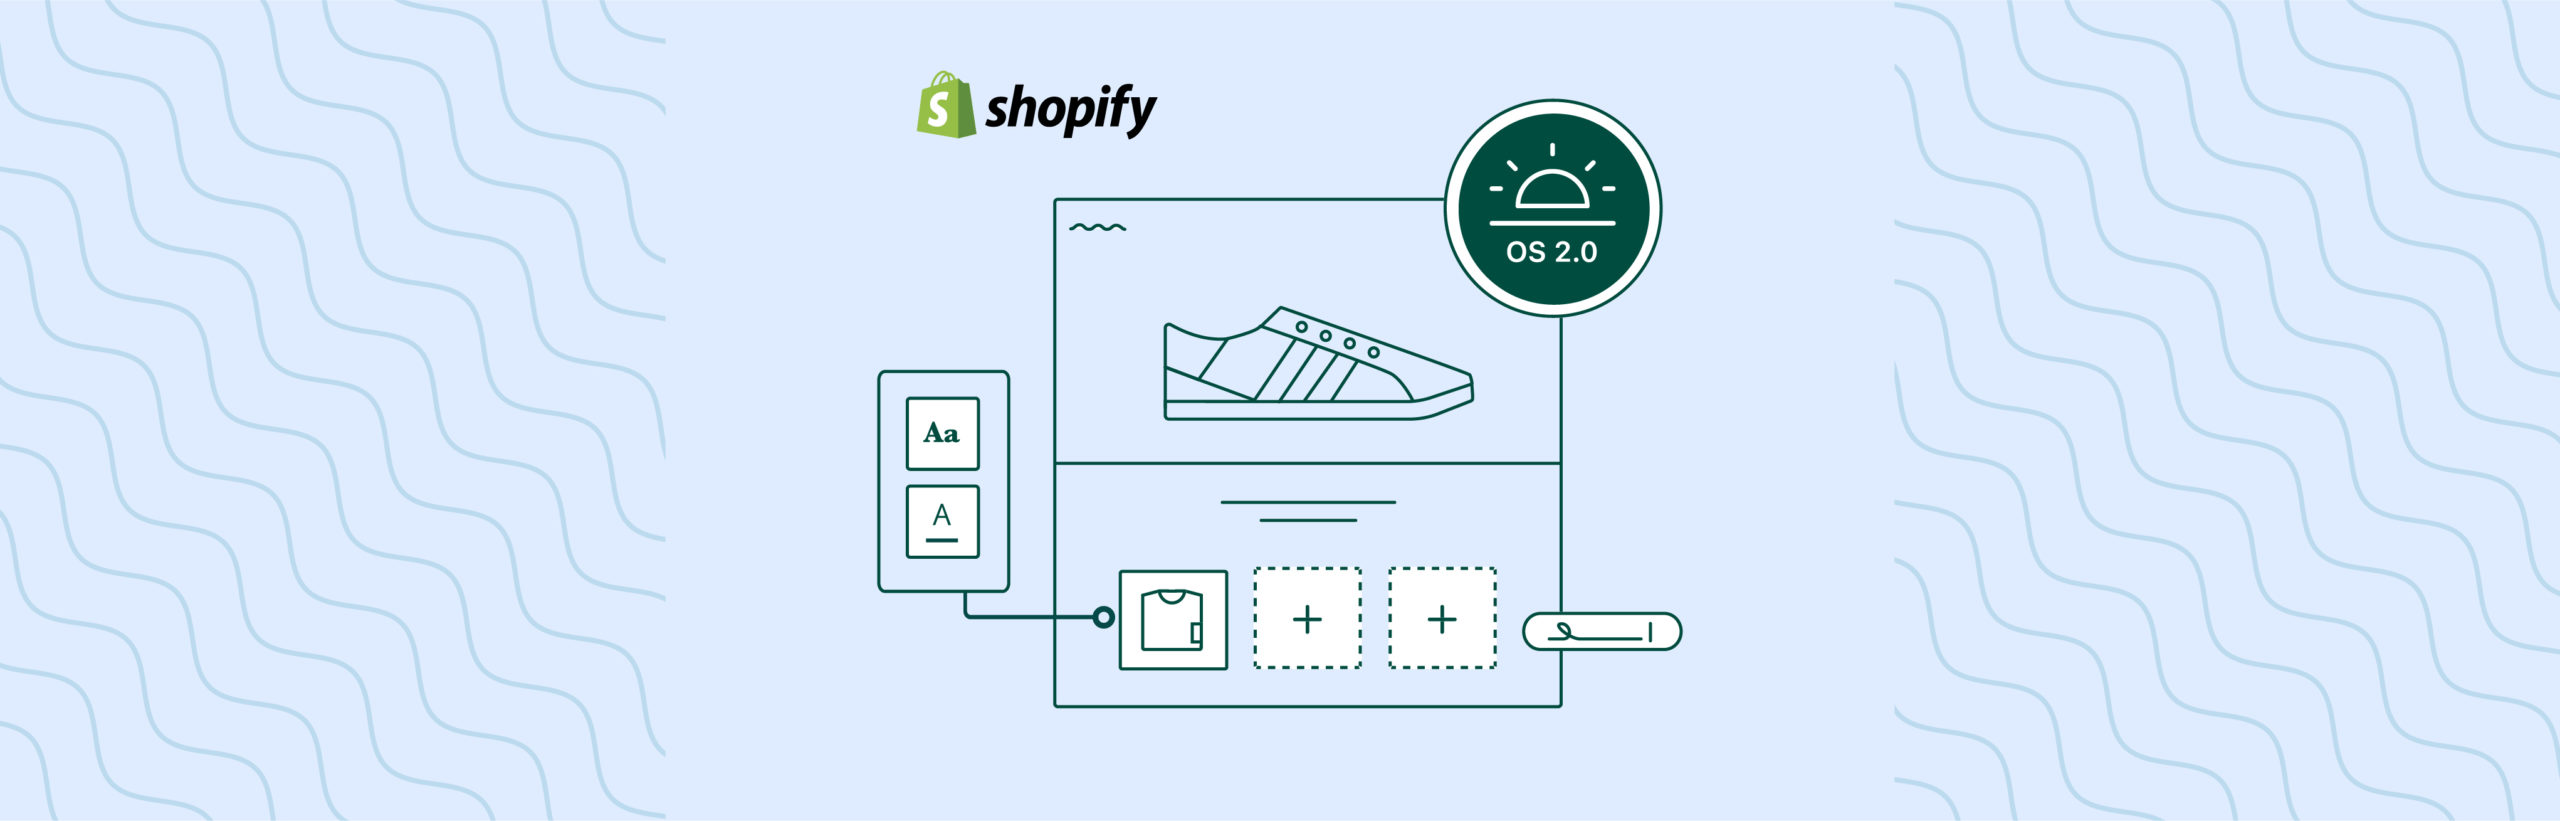 Shopify OS 2.0 Guide : 5 Key Benefits For Your Shopify Store